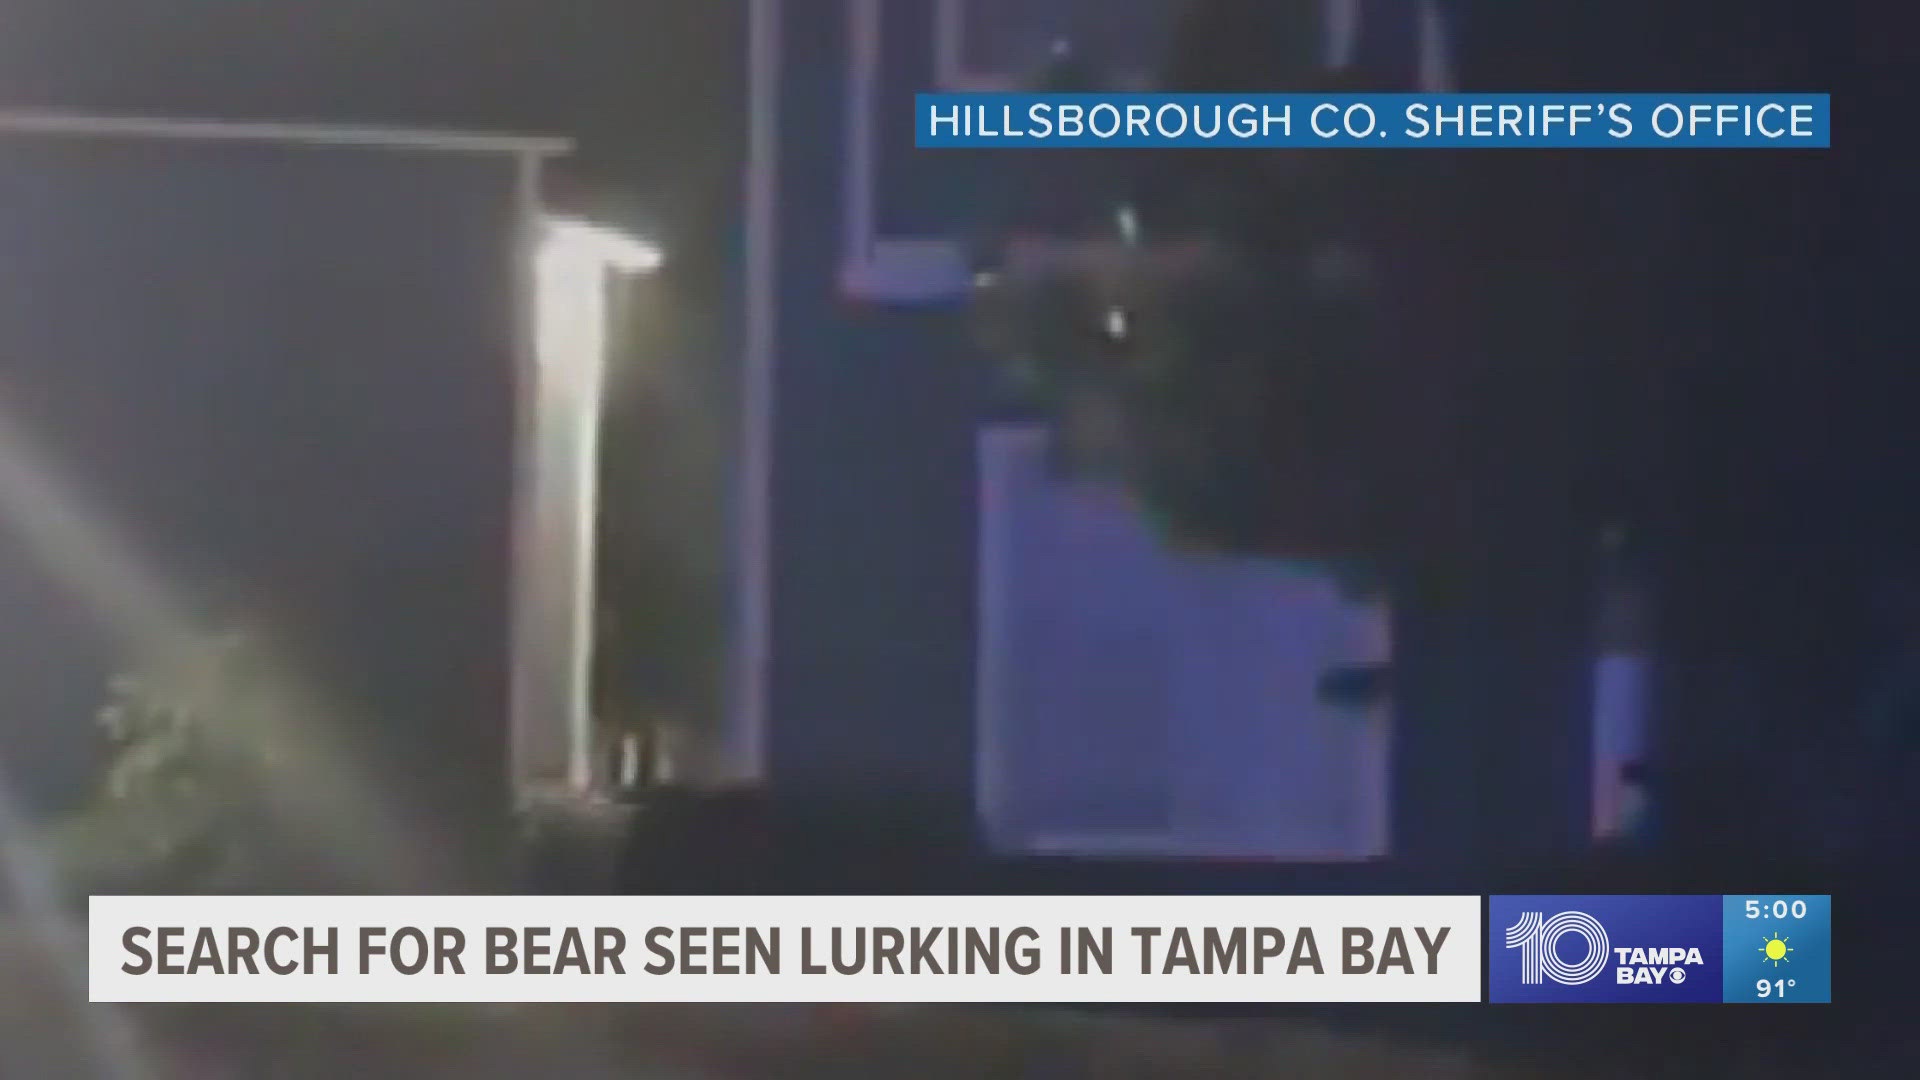 In the last few days, a black bear has been spotted in Oldsmar, Town 'N' Country and Carrollwood.